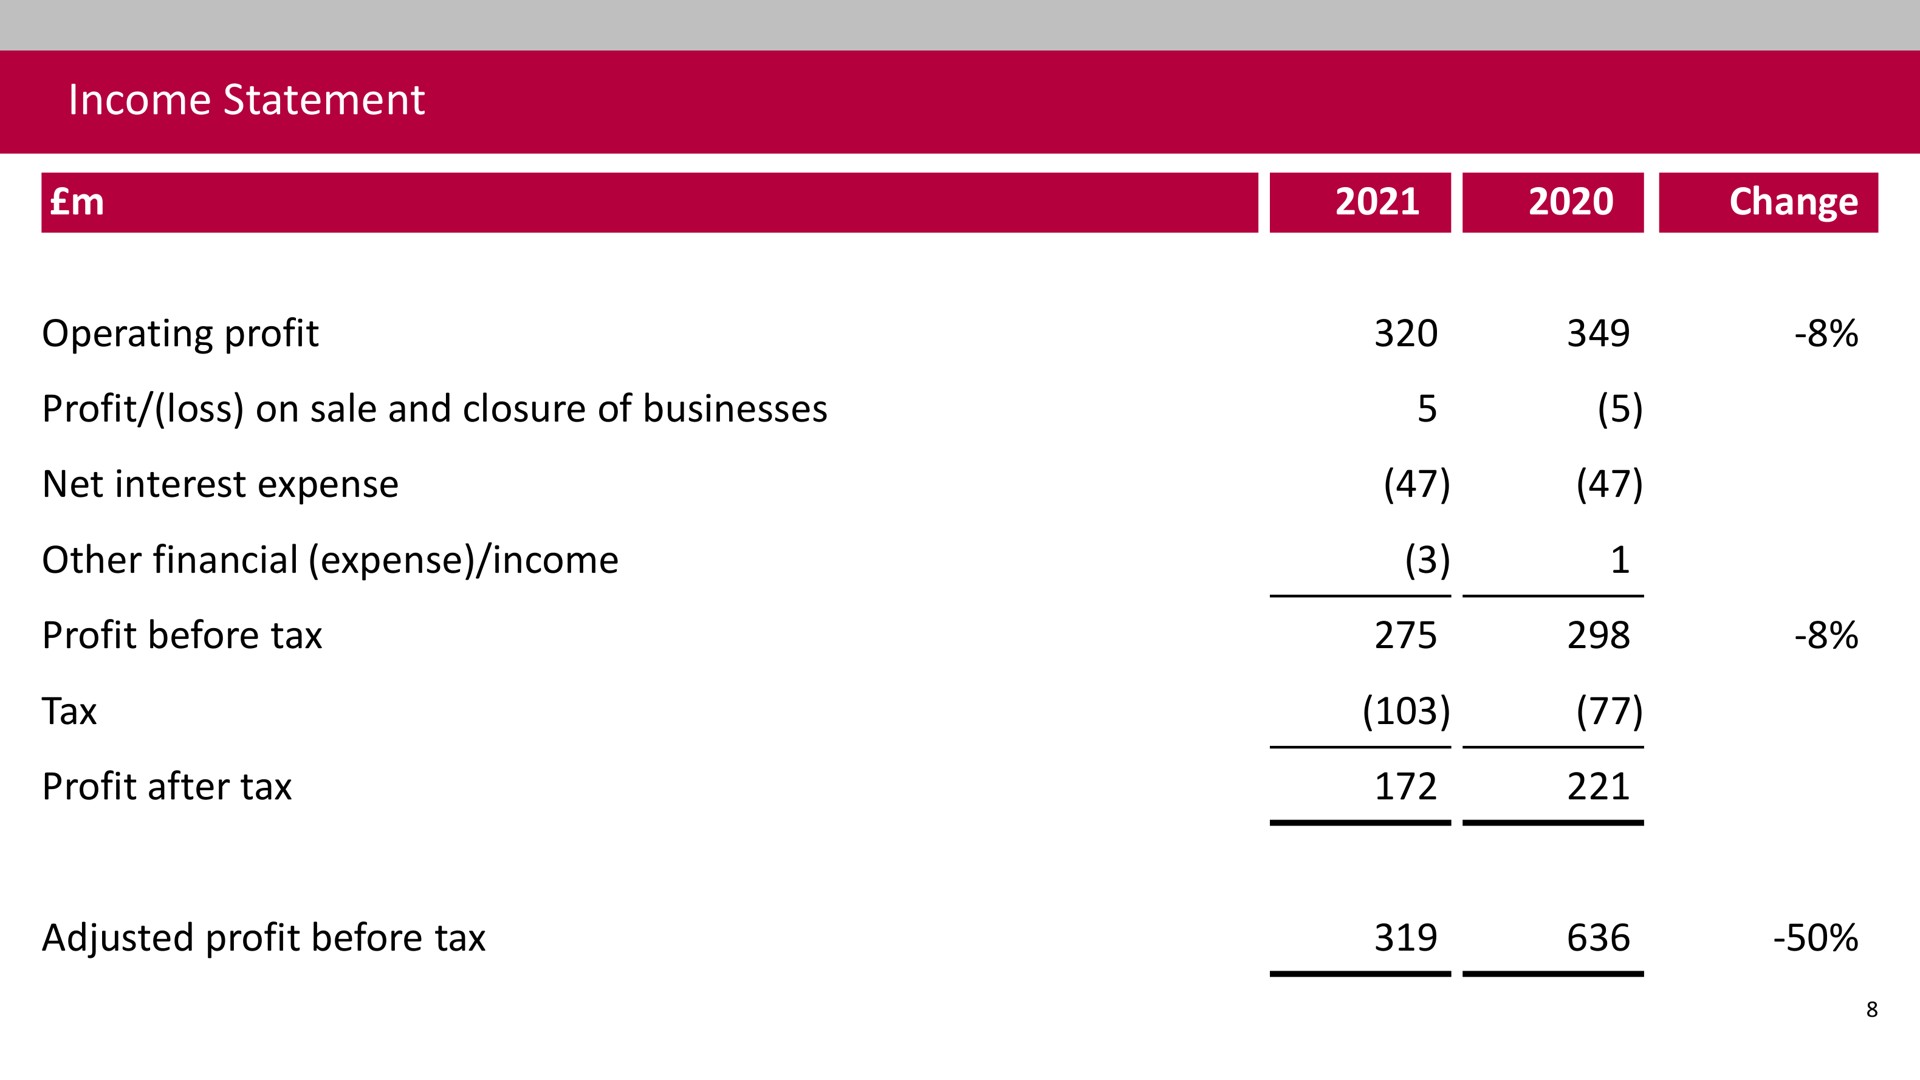 income statement operating profit profit loss on sale and closure of businesses net interest expense other financial expense income profit before tax tax profit after tax adjusted profit before tax change | Associated British Foods